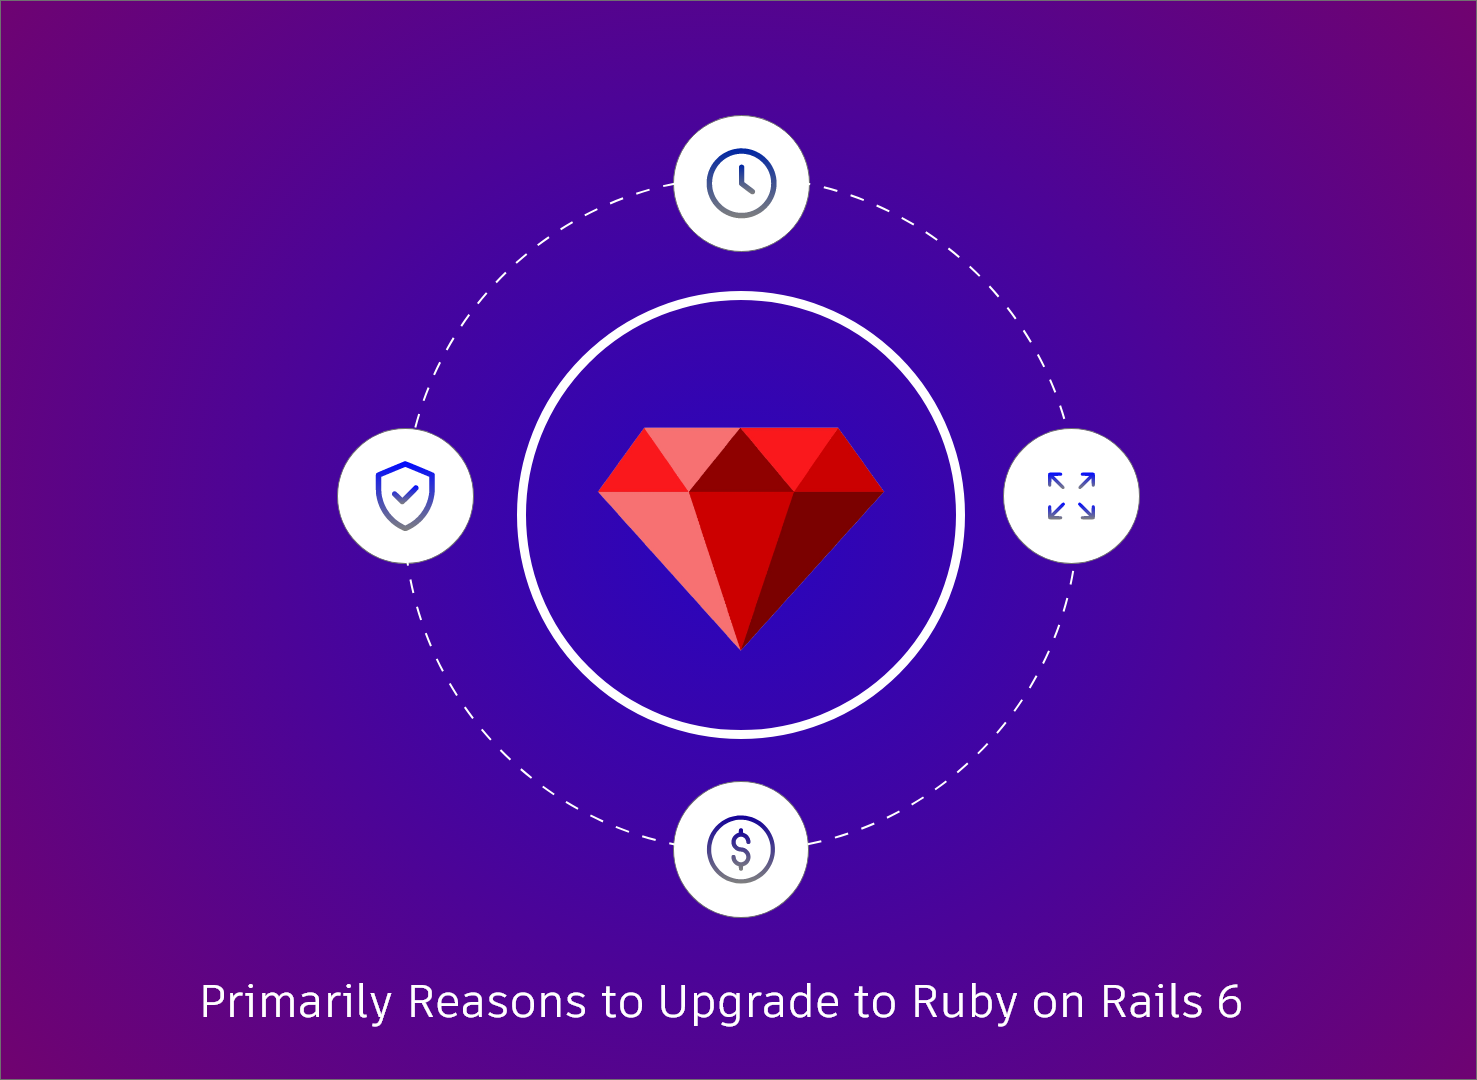 Primarily Reasons to Upgrade to Ruby on Rails 6